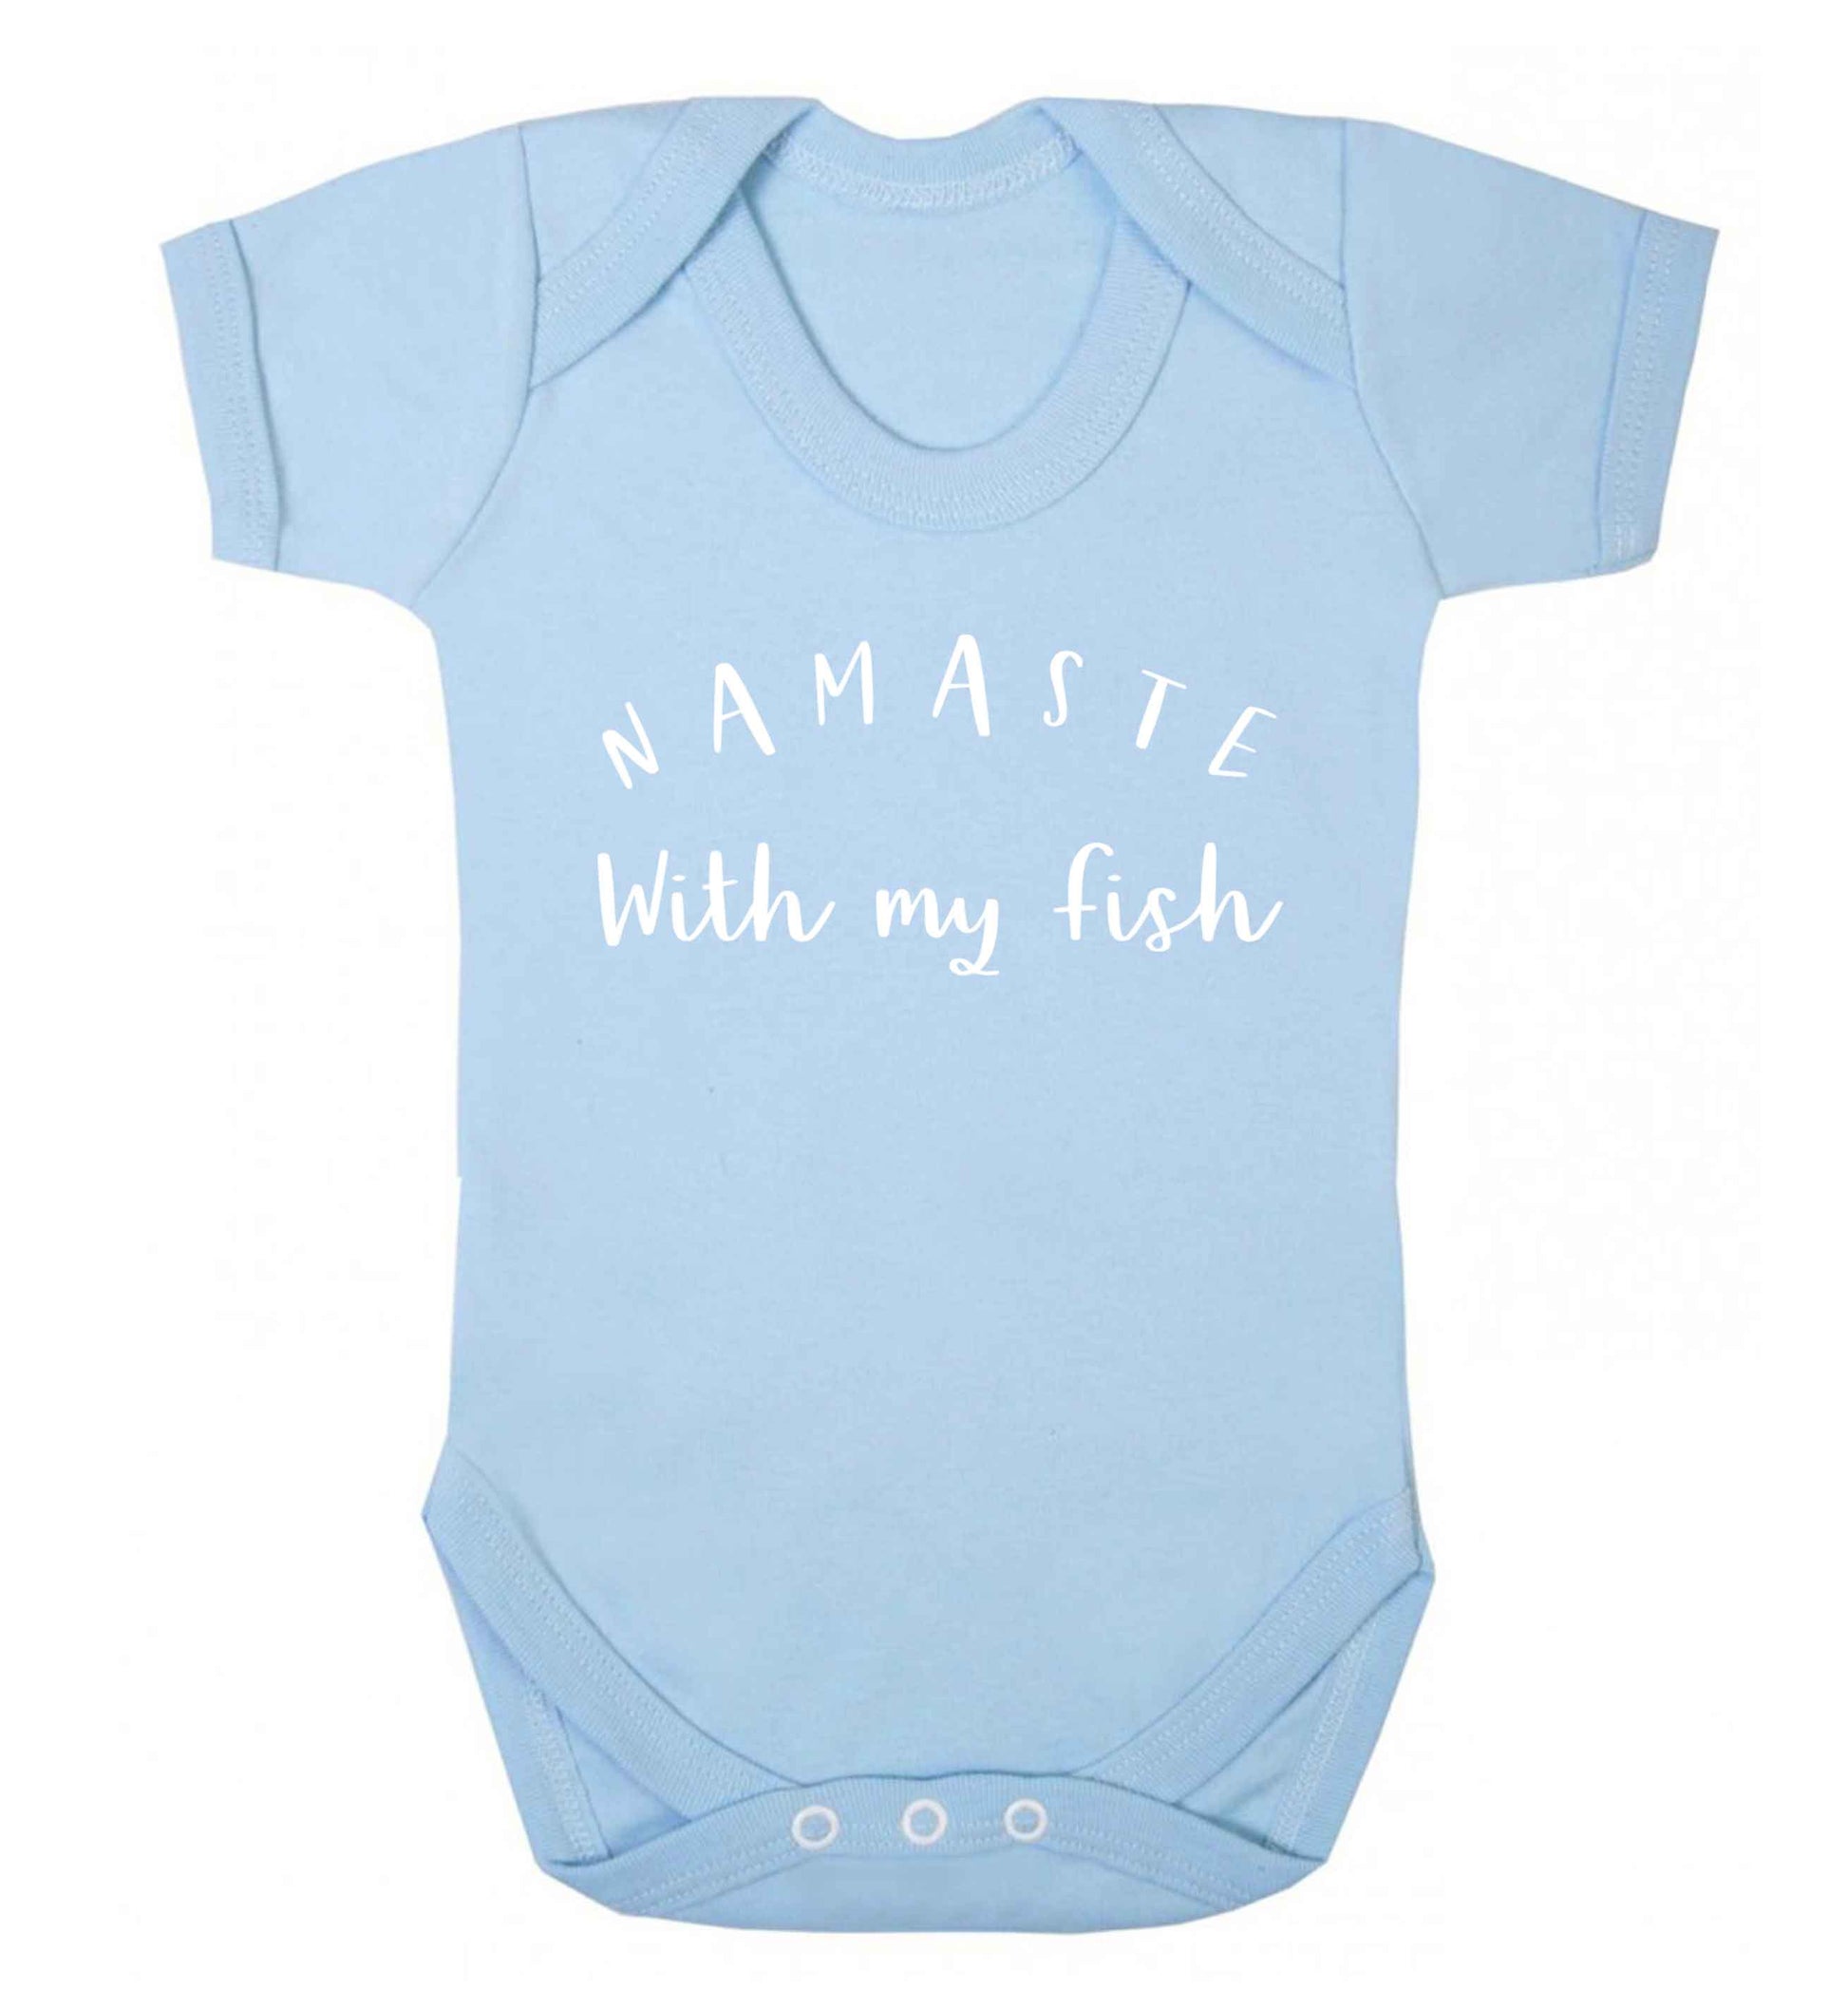 Namaste with my fish Baby Vest pale blue 18-24 months